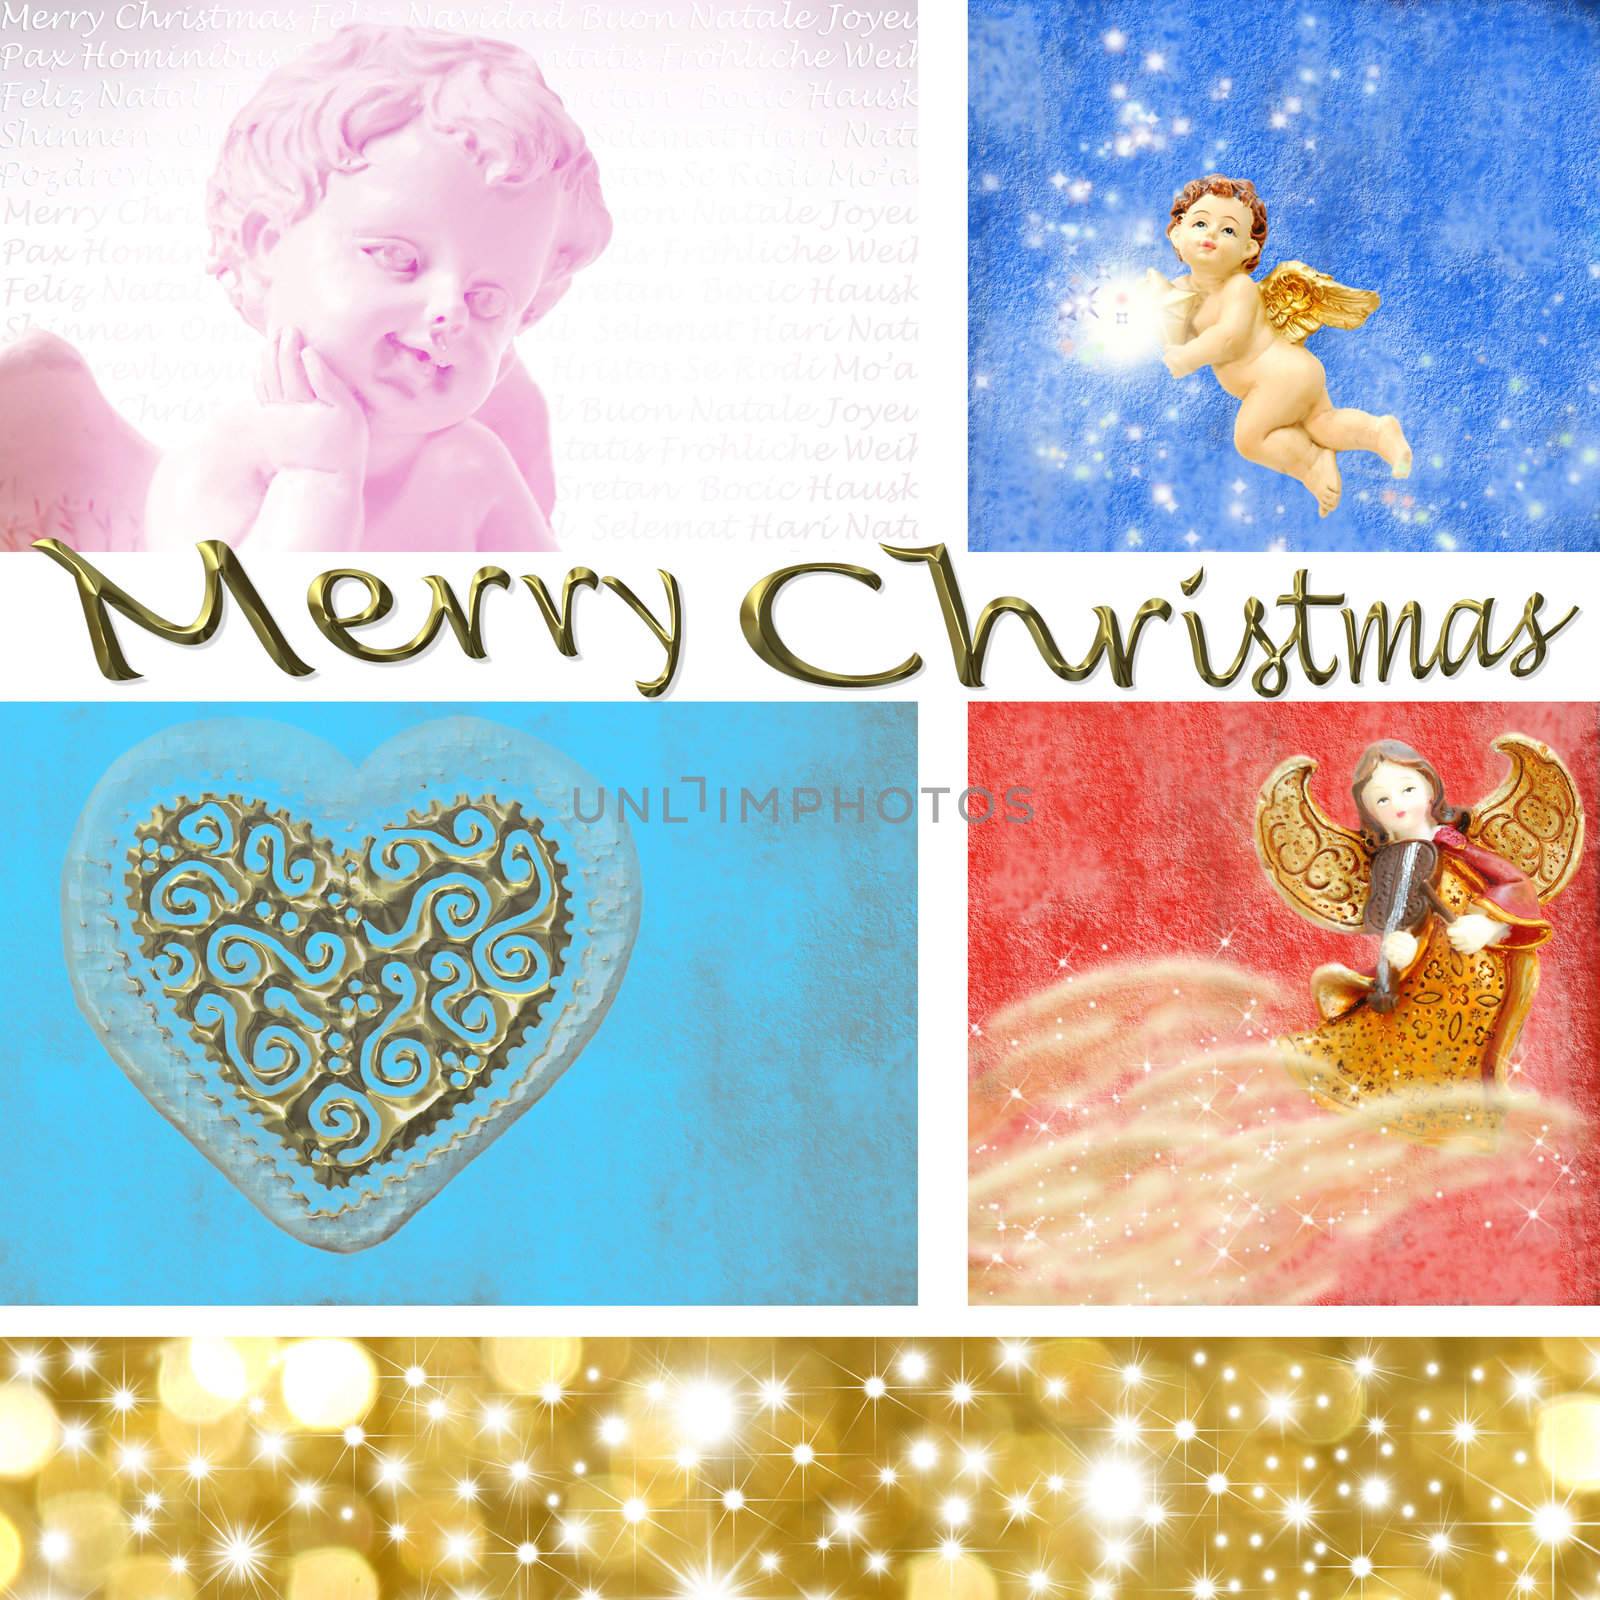 Merry Christmas card by Carche